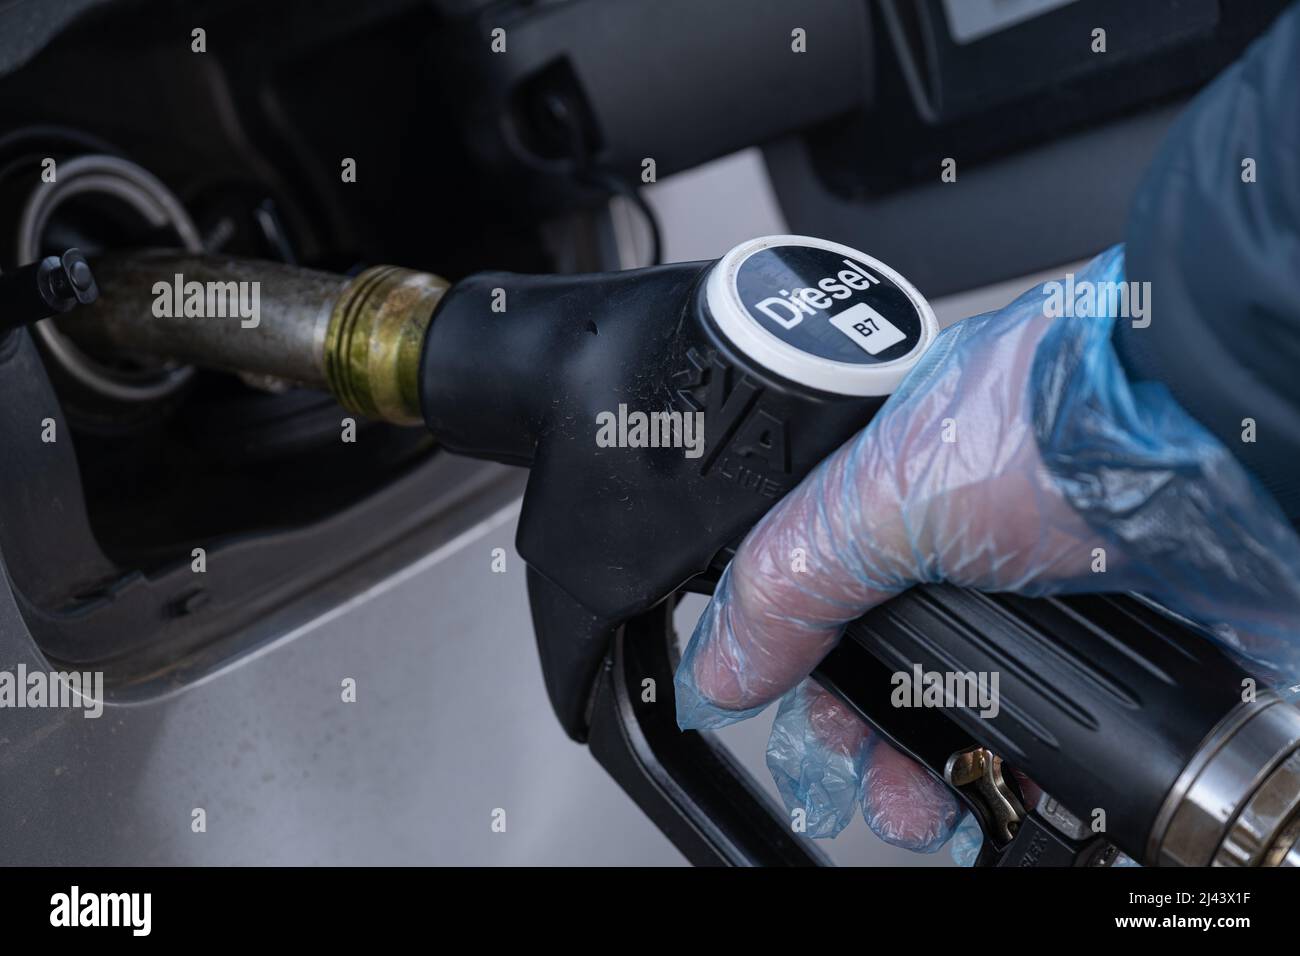 Diesel. Refueling the car.Refueling pistol in the hands of a man in a glove.A man fills up a car tank . Fuel price in Europe. Stock Photo